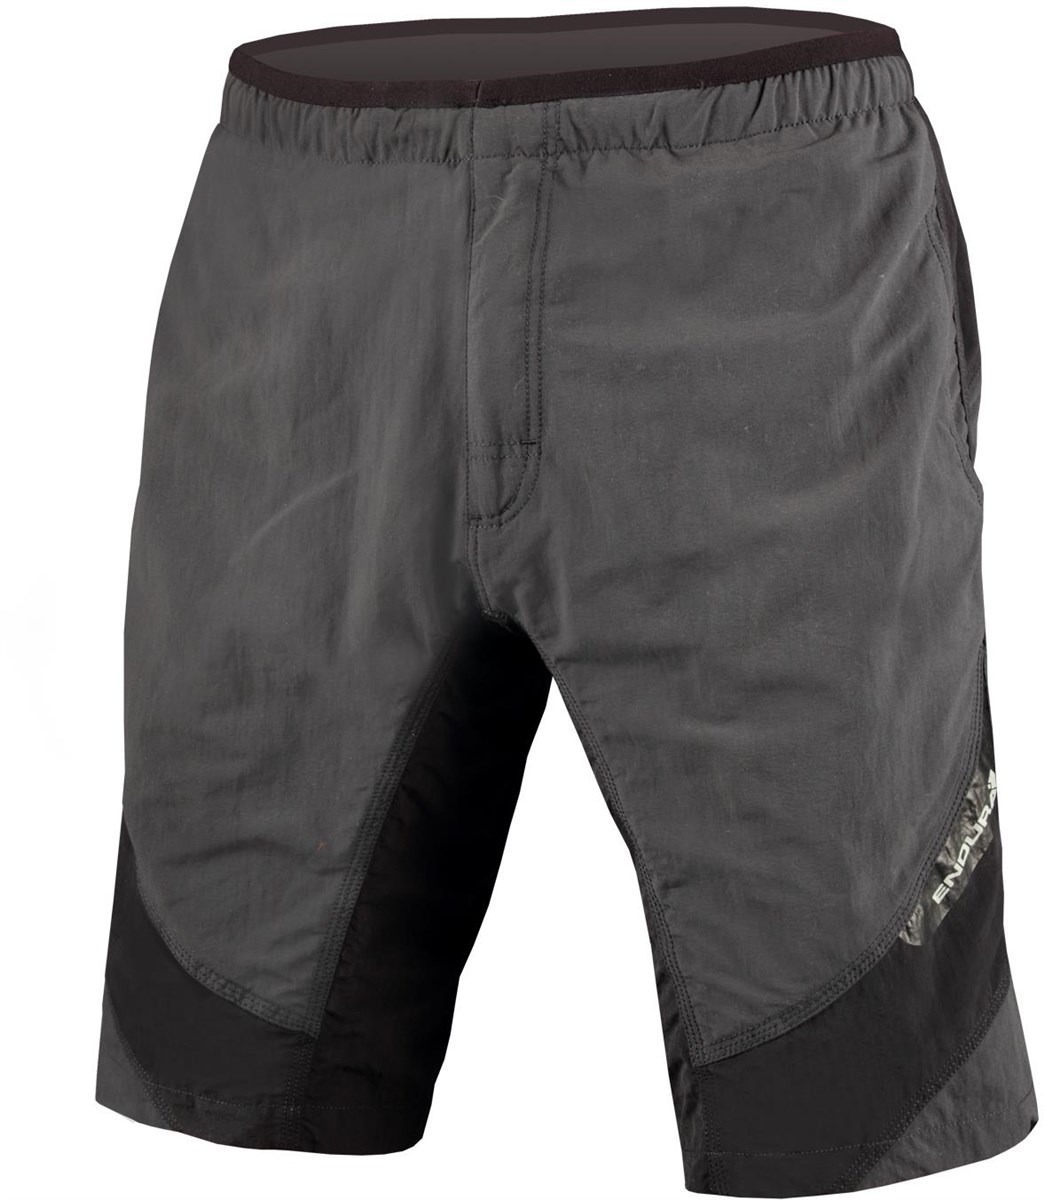 Endura Firefly Baggy Cycling Shorts AW16 product image